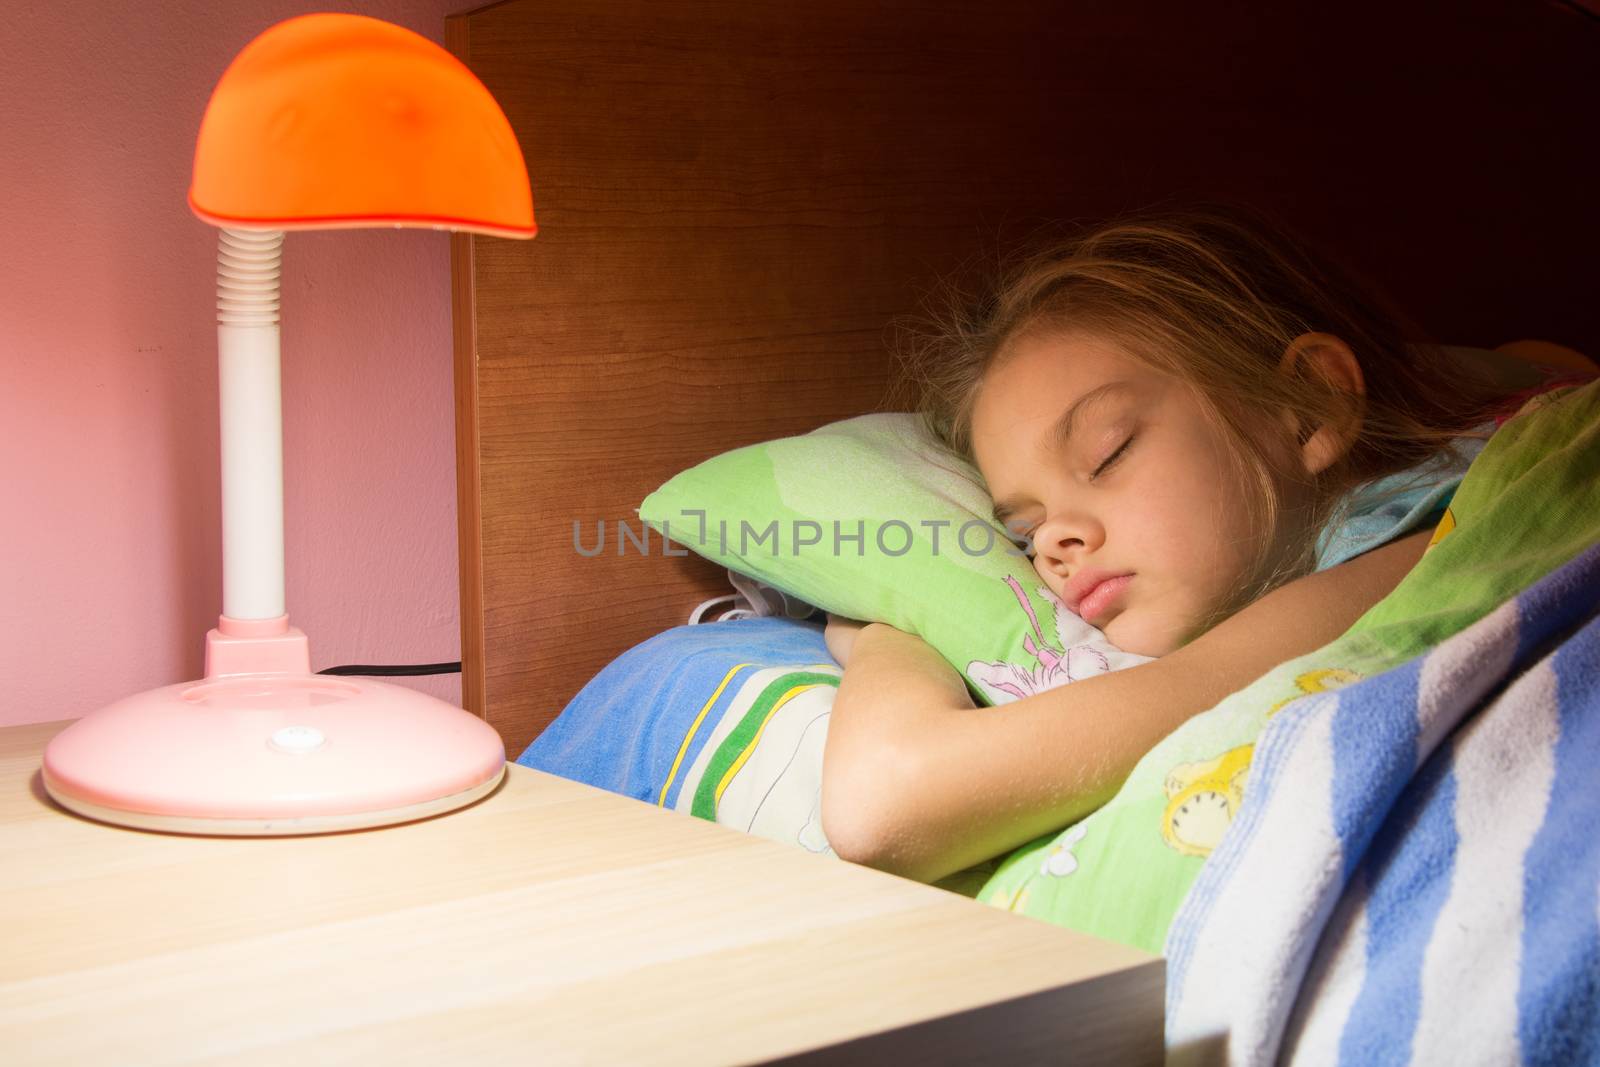 Seven-year girl asleep in bed, reading lamp is included on the next table